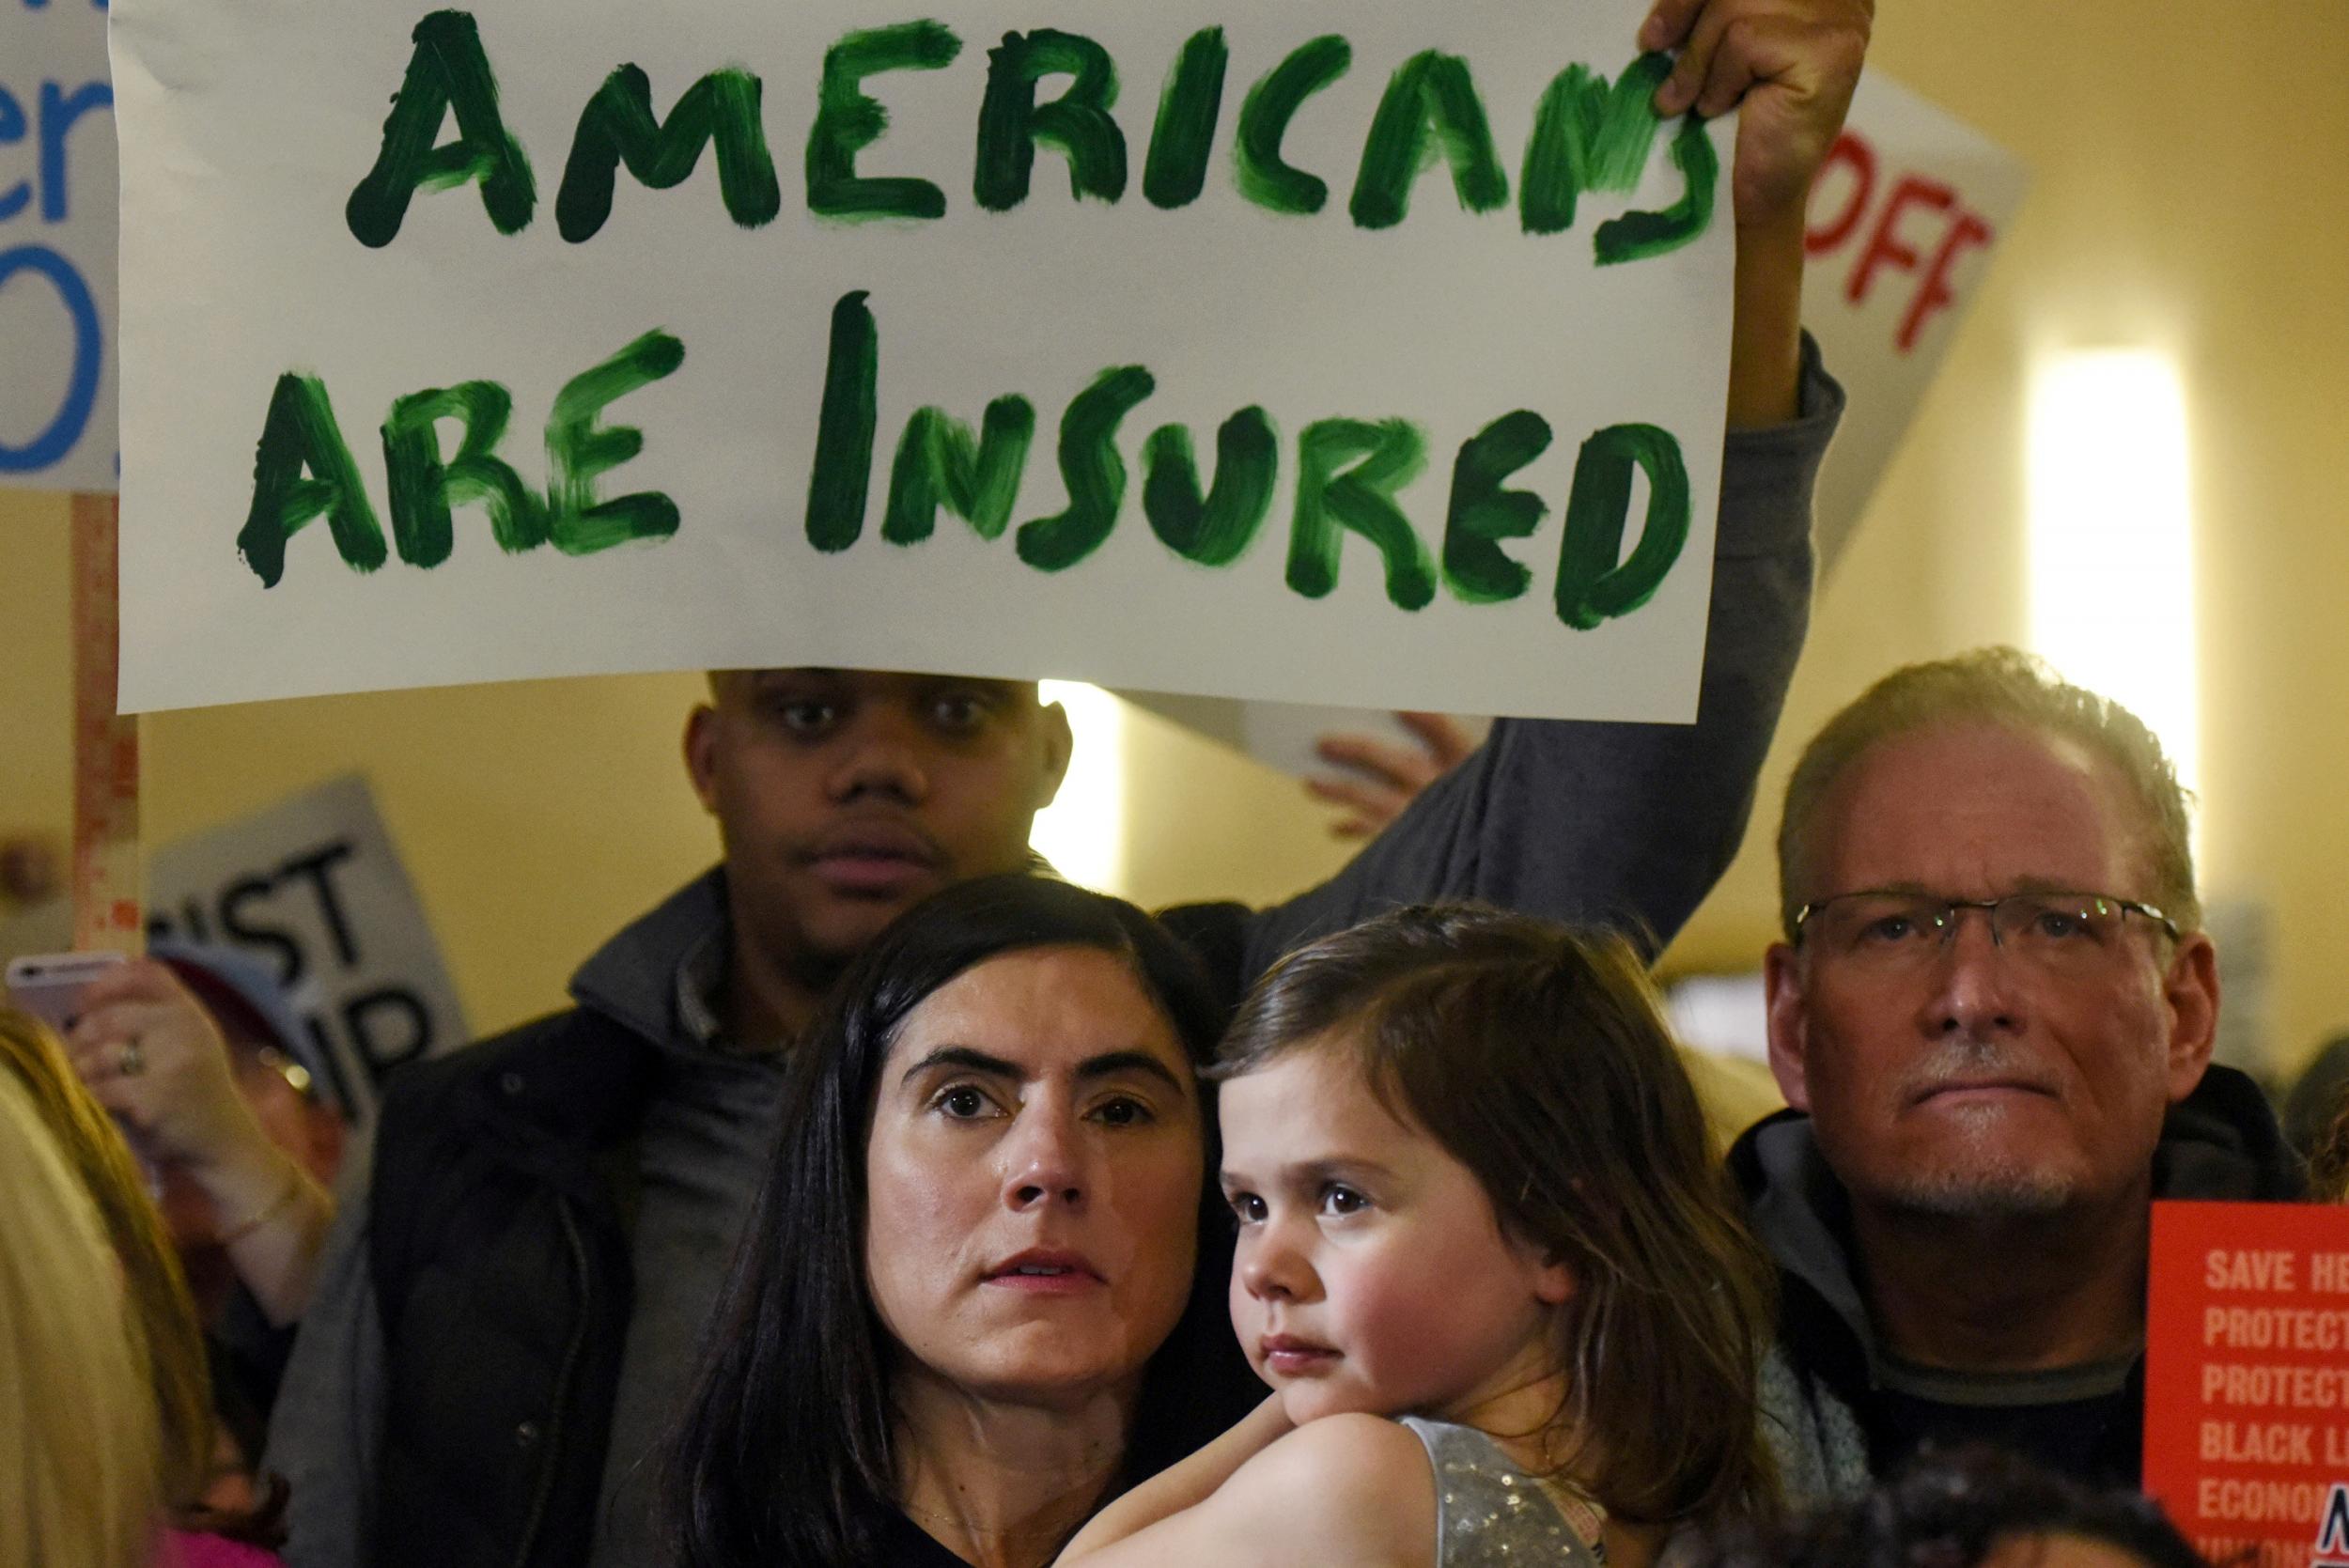 Obamacare supporters demonstrate against Donald Trump at a rally in New Jersey